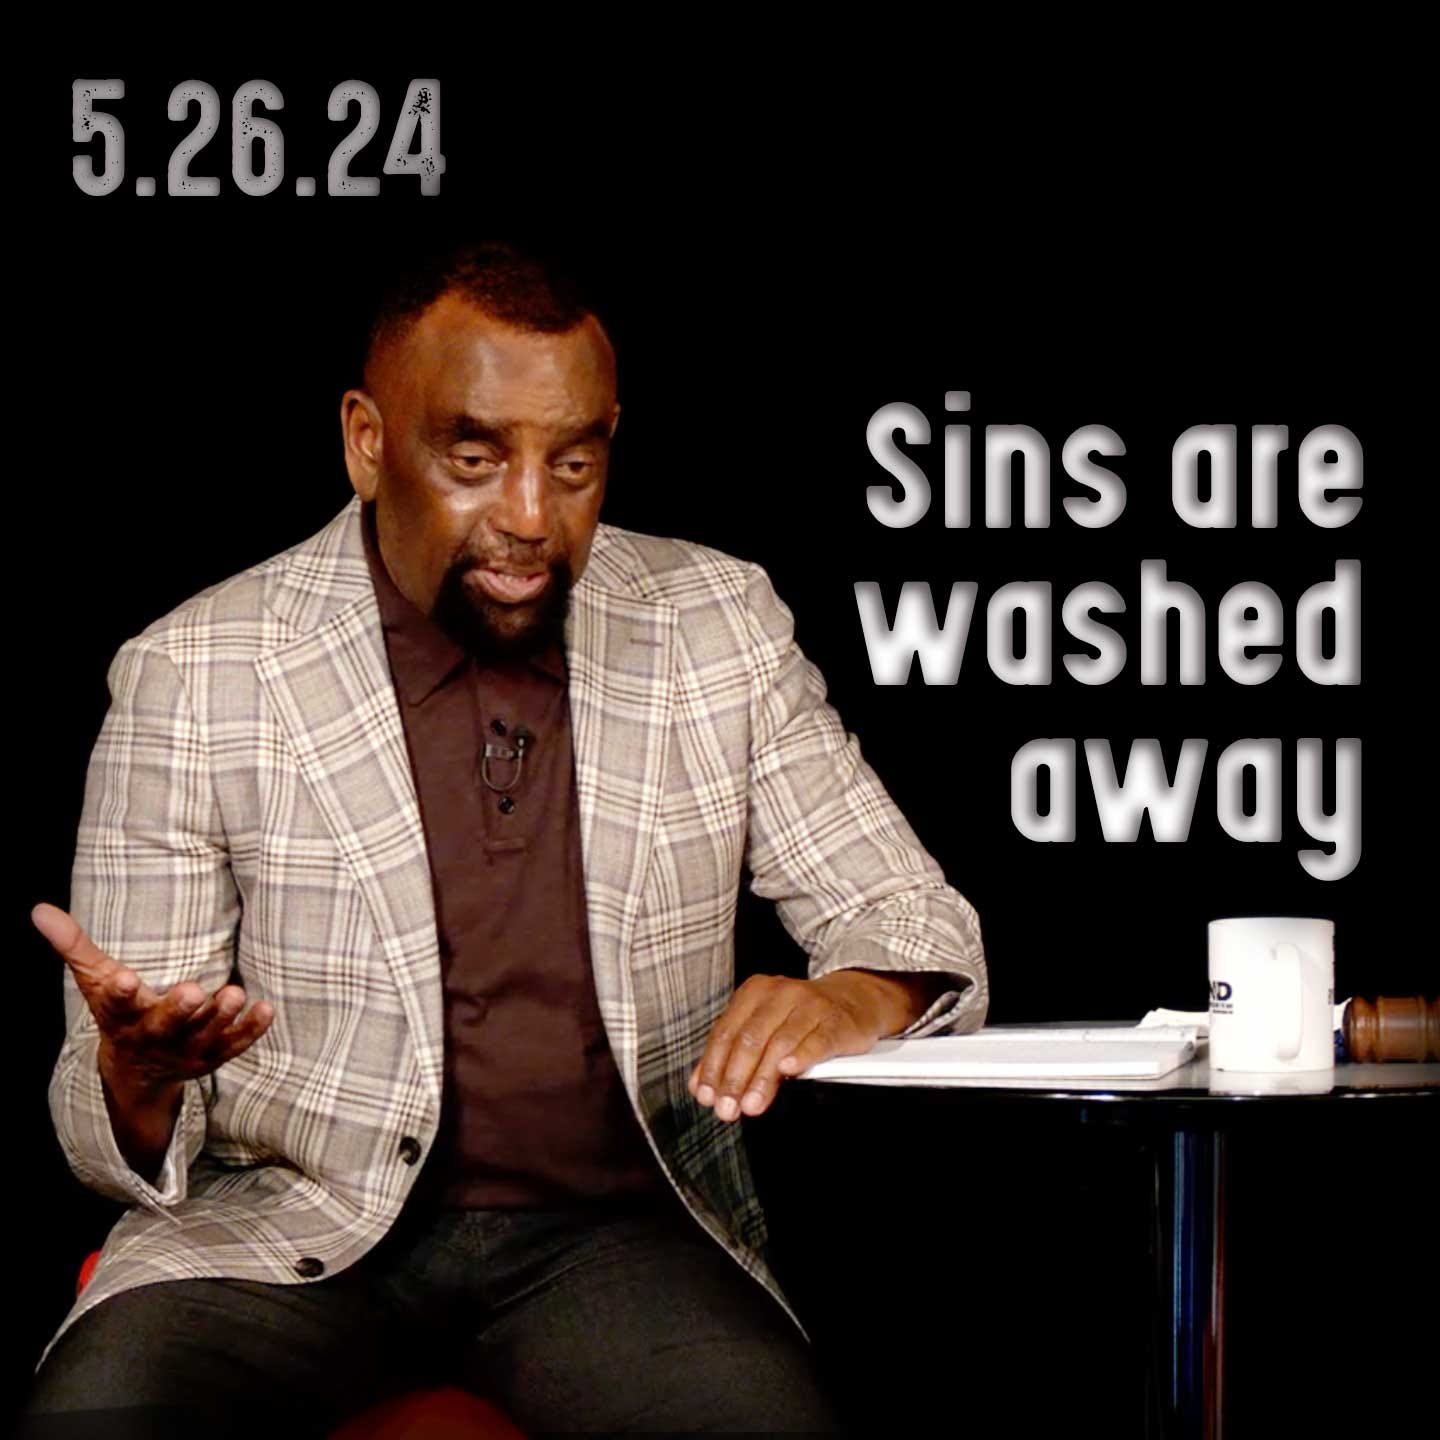 All of your sins are washed away | Church 5/26/24